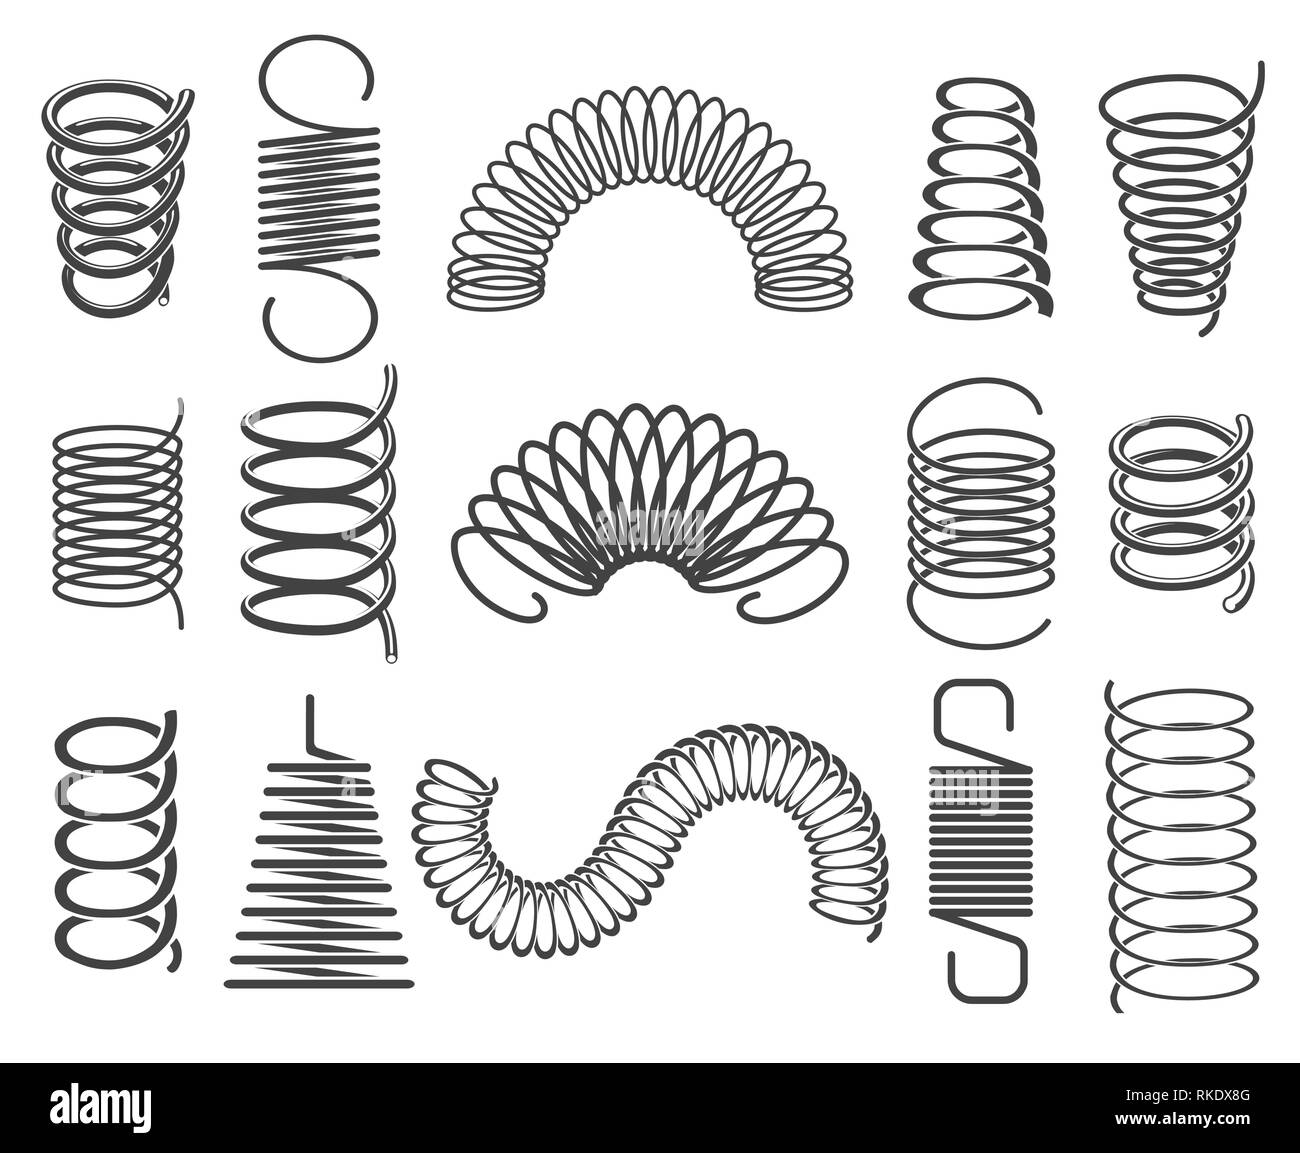 Metal springs. Vector metallic spiral and coil spring icons, compacted steel springs silhouette symbols isolated on white background Stock Vector